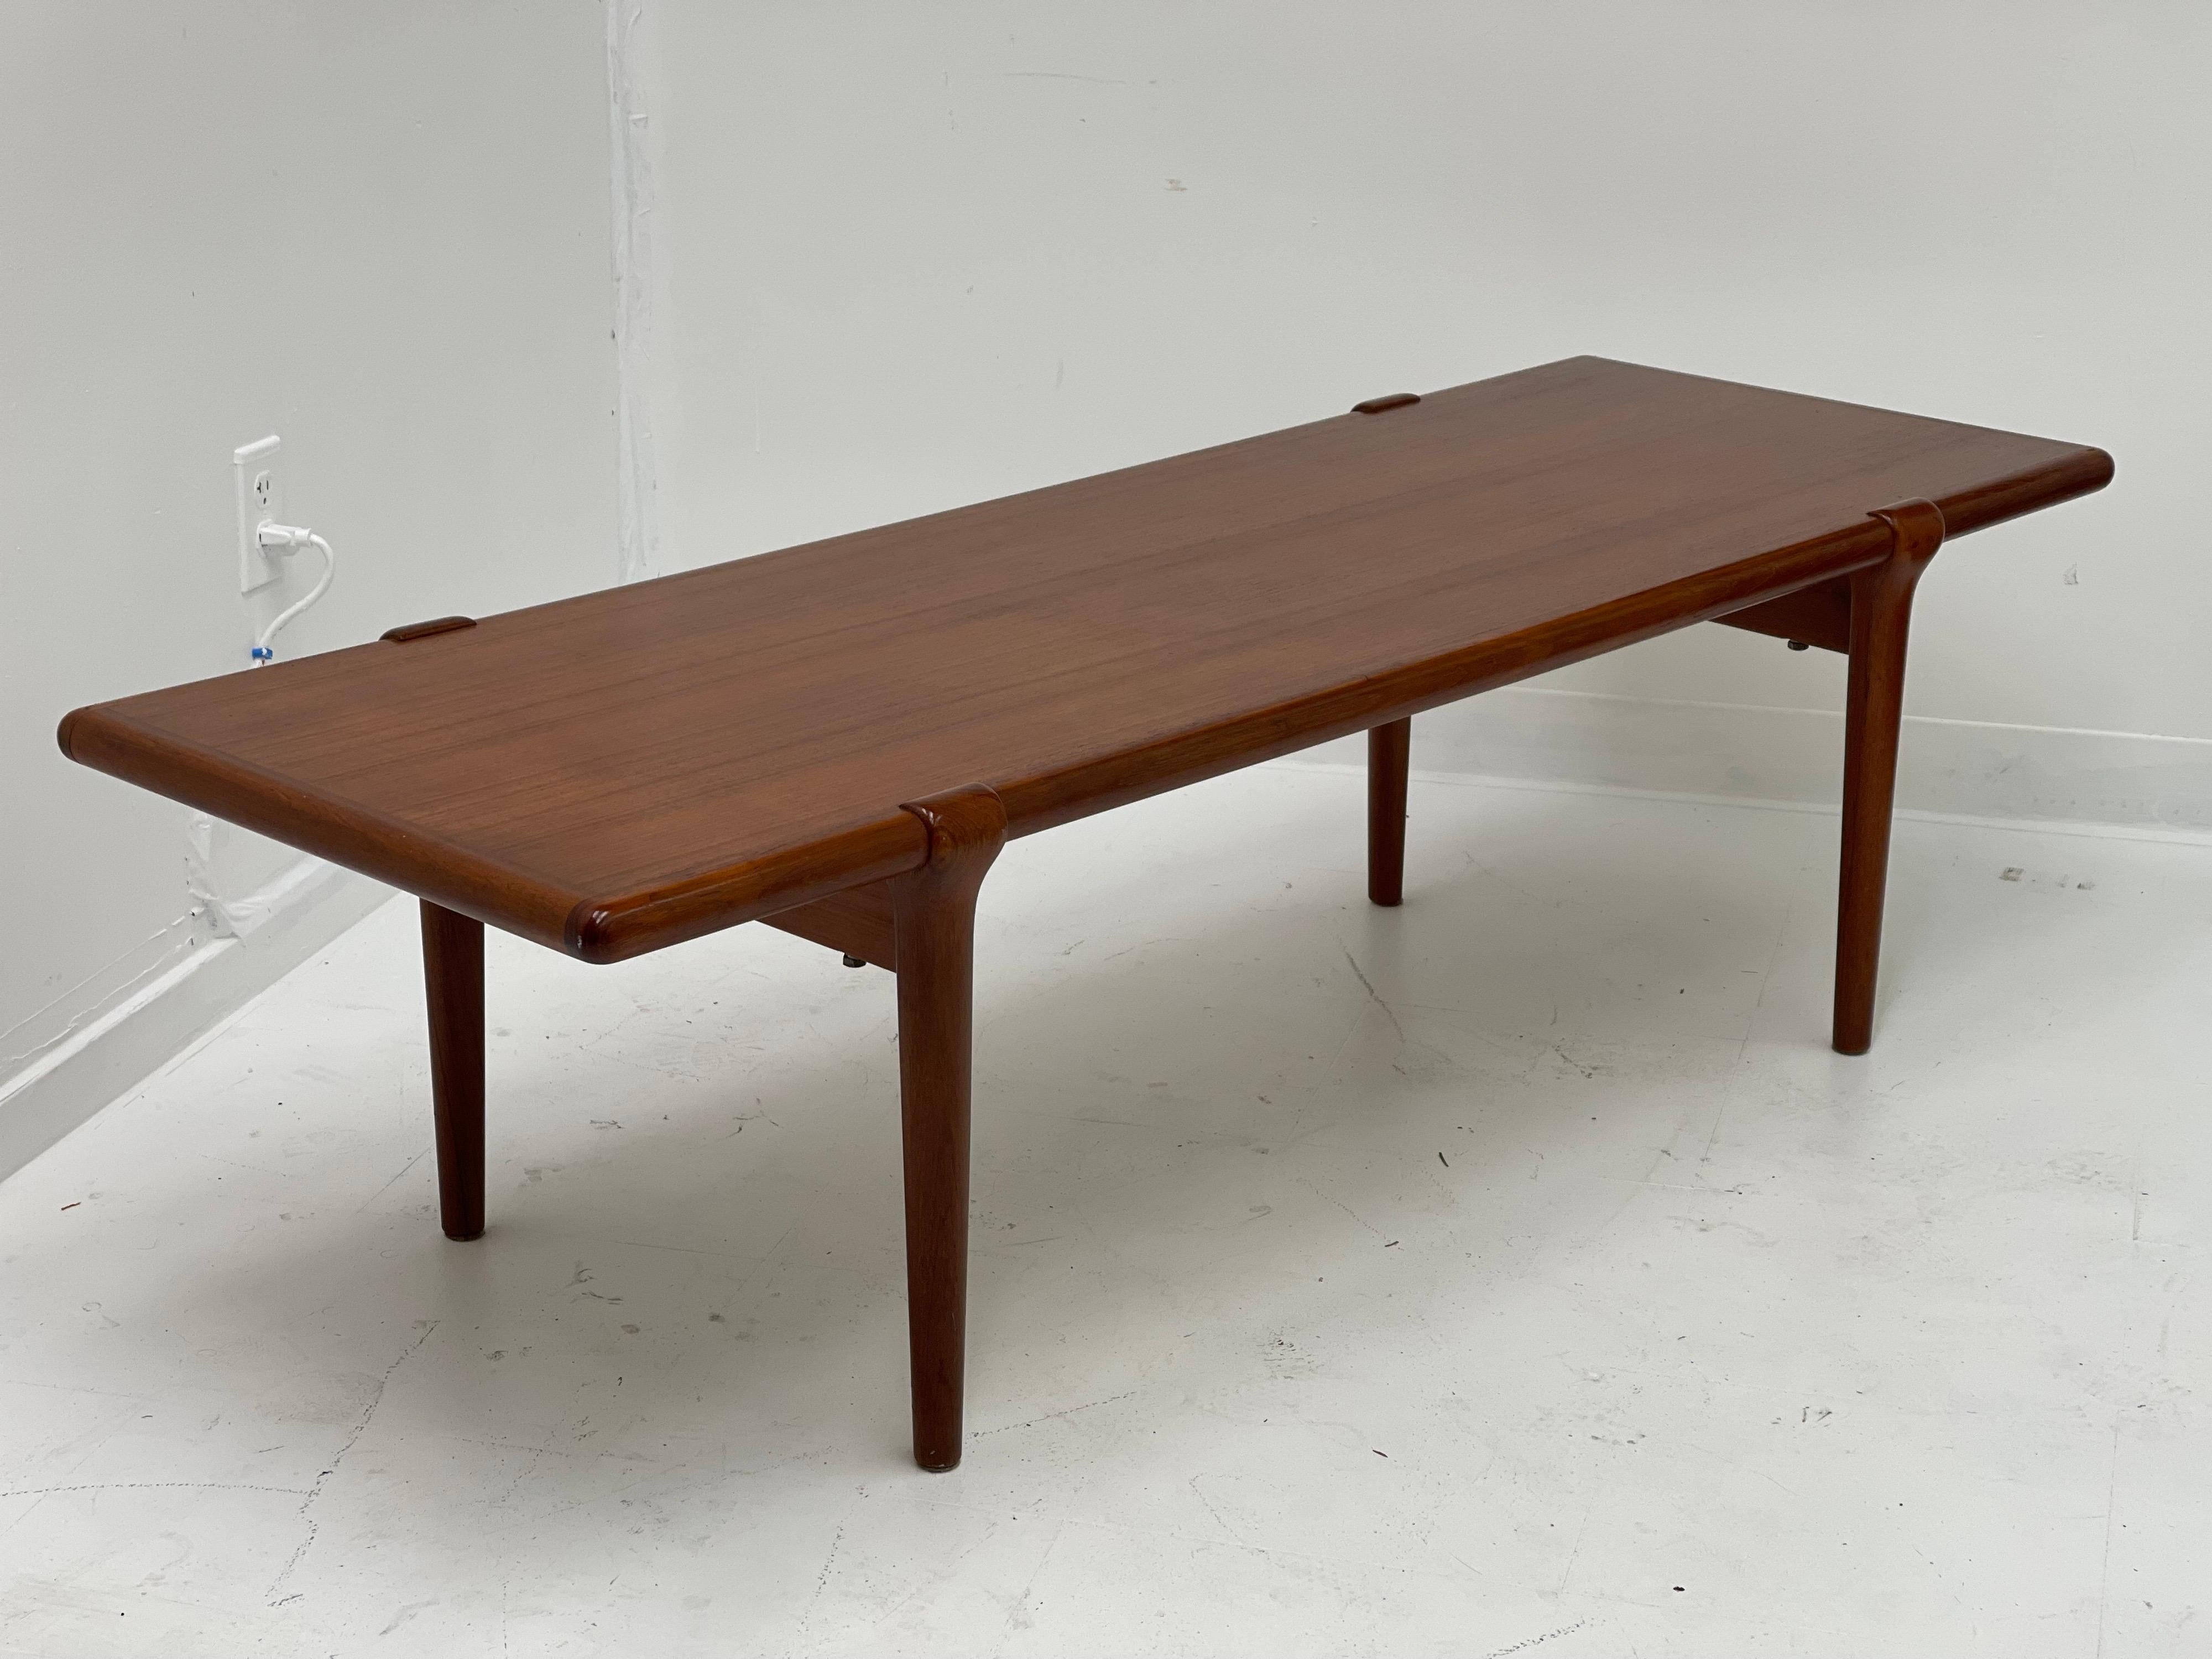 Unique and classic Danish modern coffee table styled after Niels Moller.